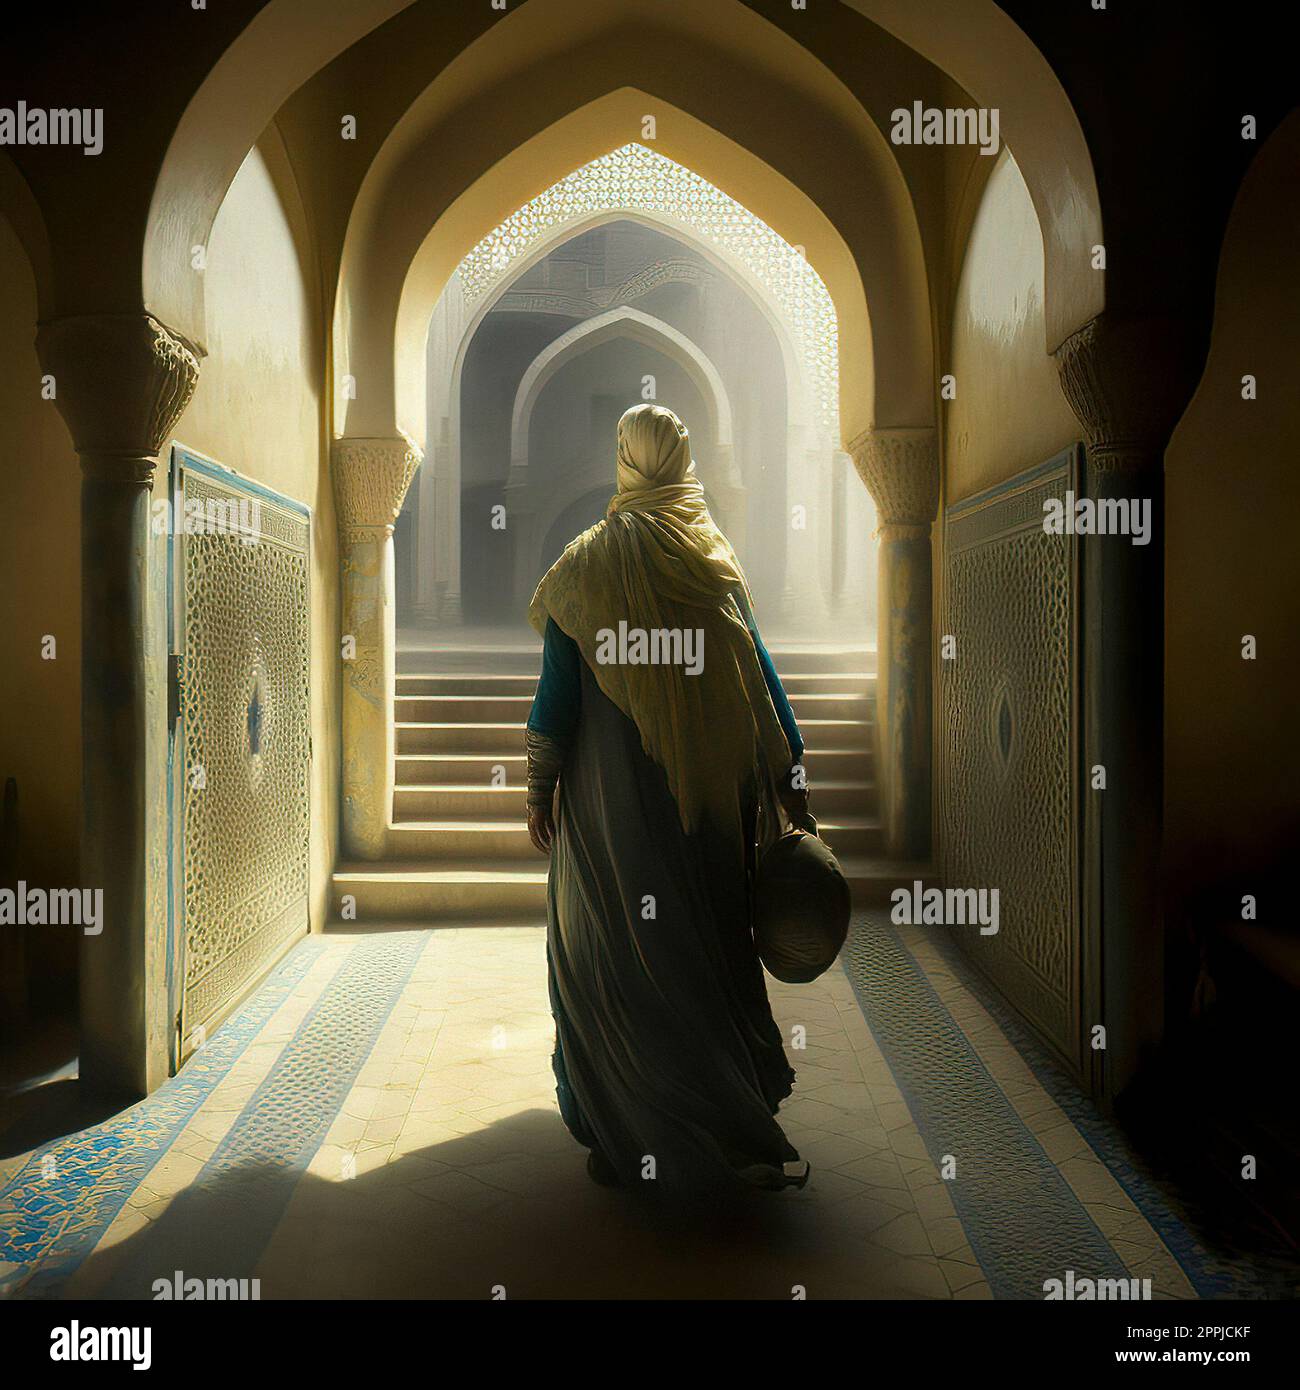 Woman with a White Scarf and Wide, Long Robe Walking Down a Hallway in a Mosque Stock Photo